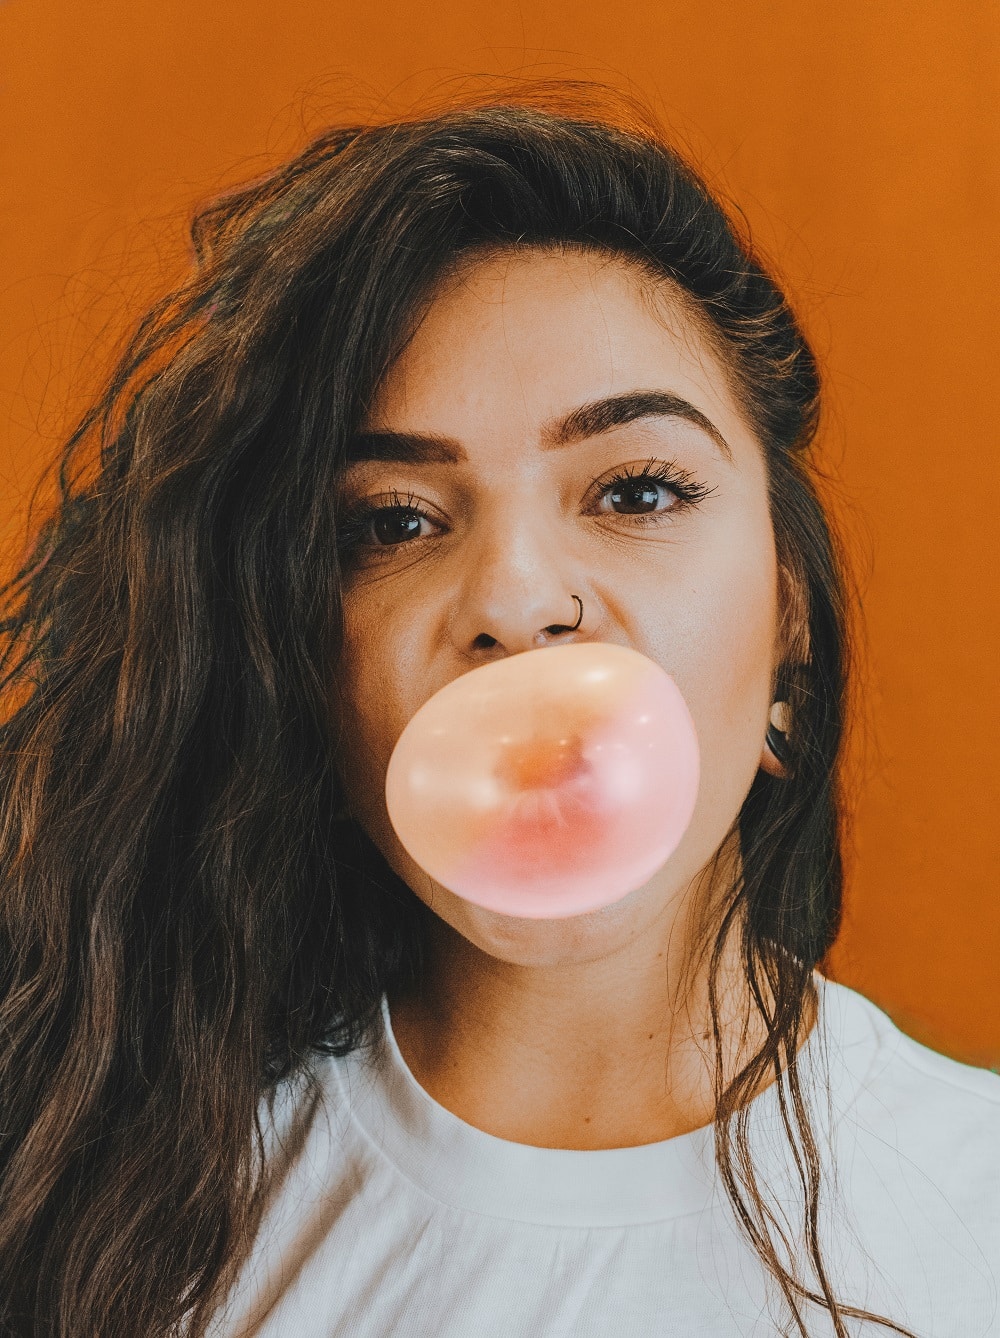 Can Chewing Gum Help Fight Cavities? Is Chewing Gum Bad For Teeth?